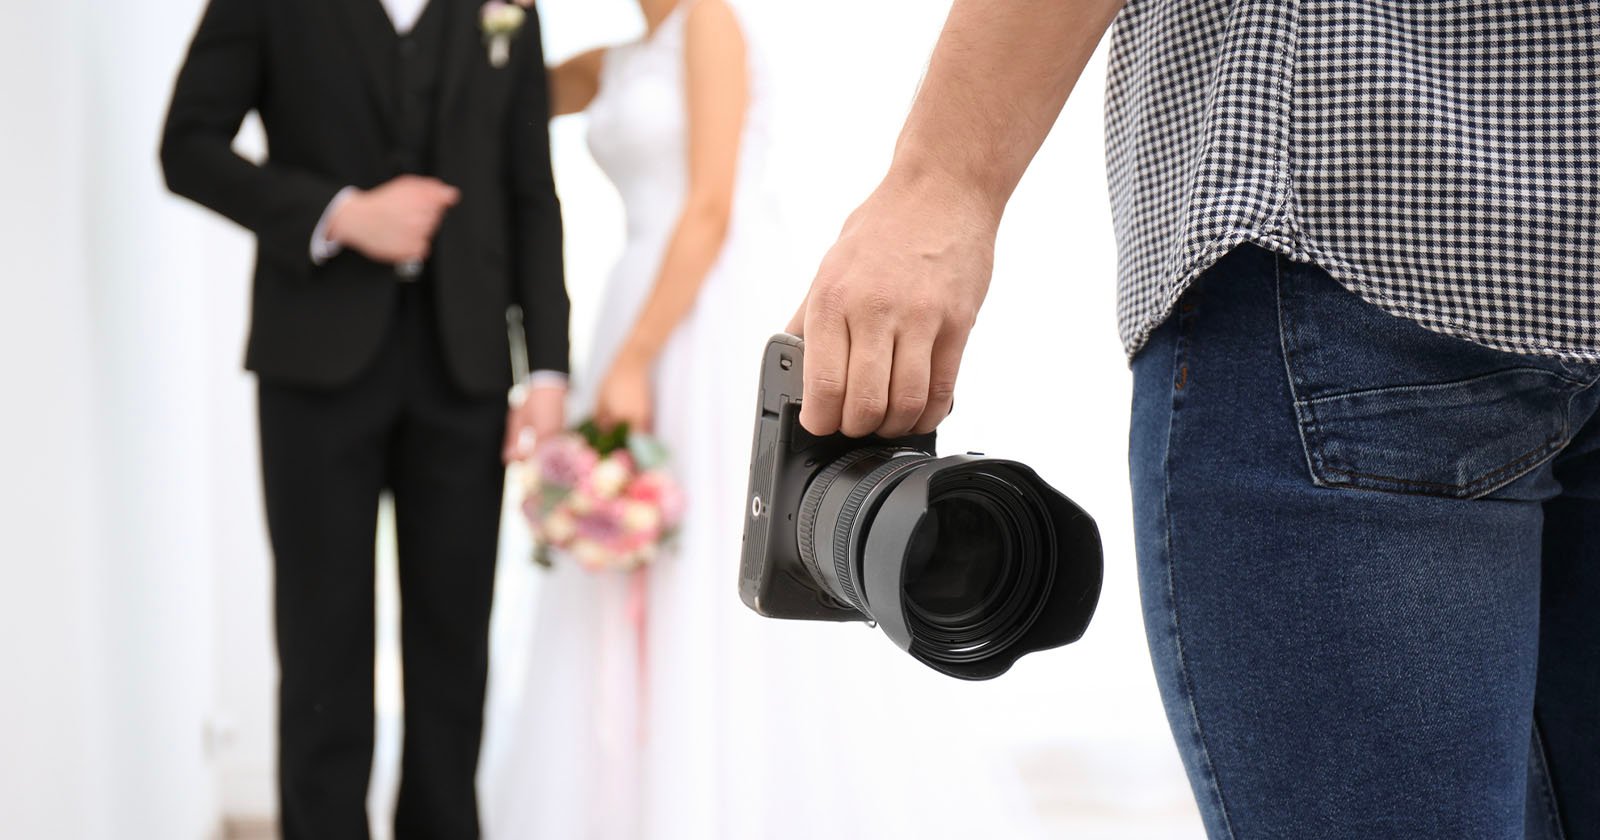 Wedding Photographer Fined $30,000 For Using Images Taken By Other Photographers